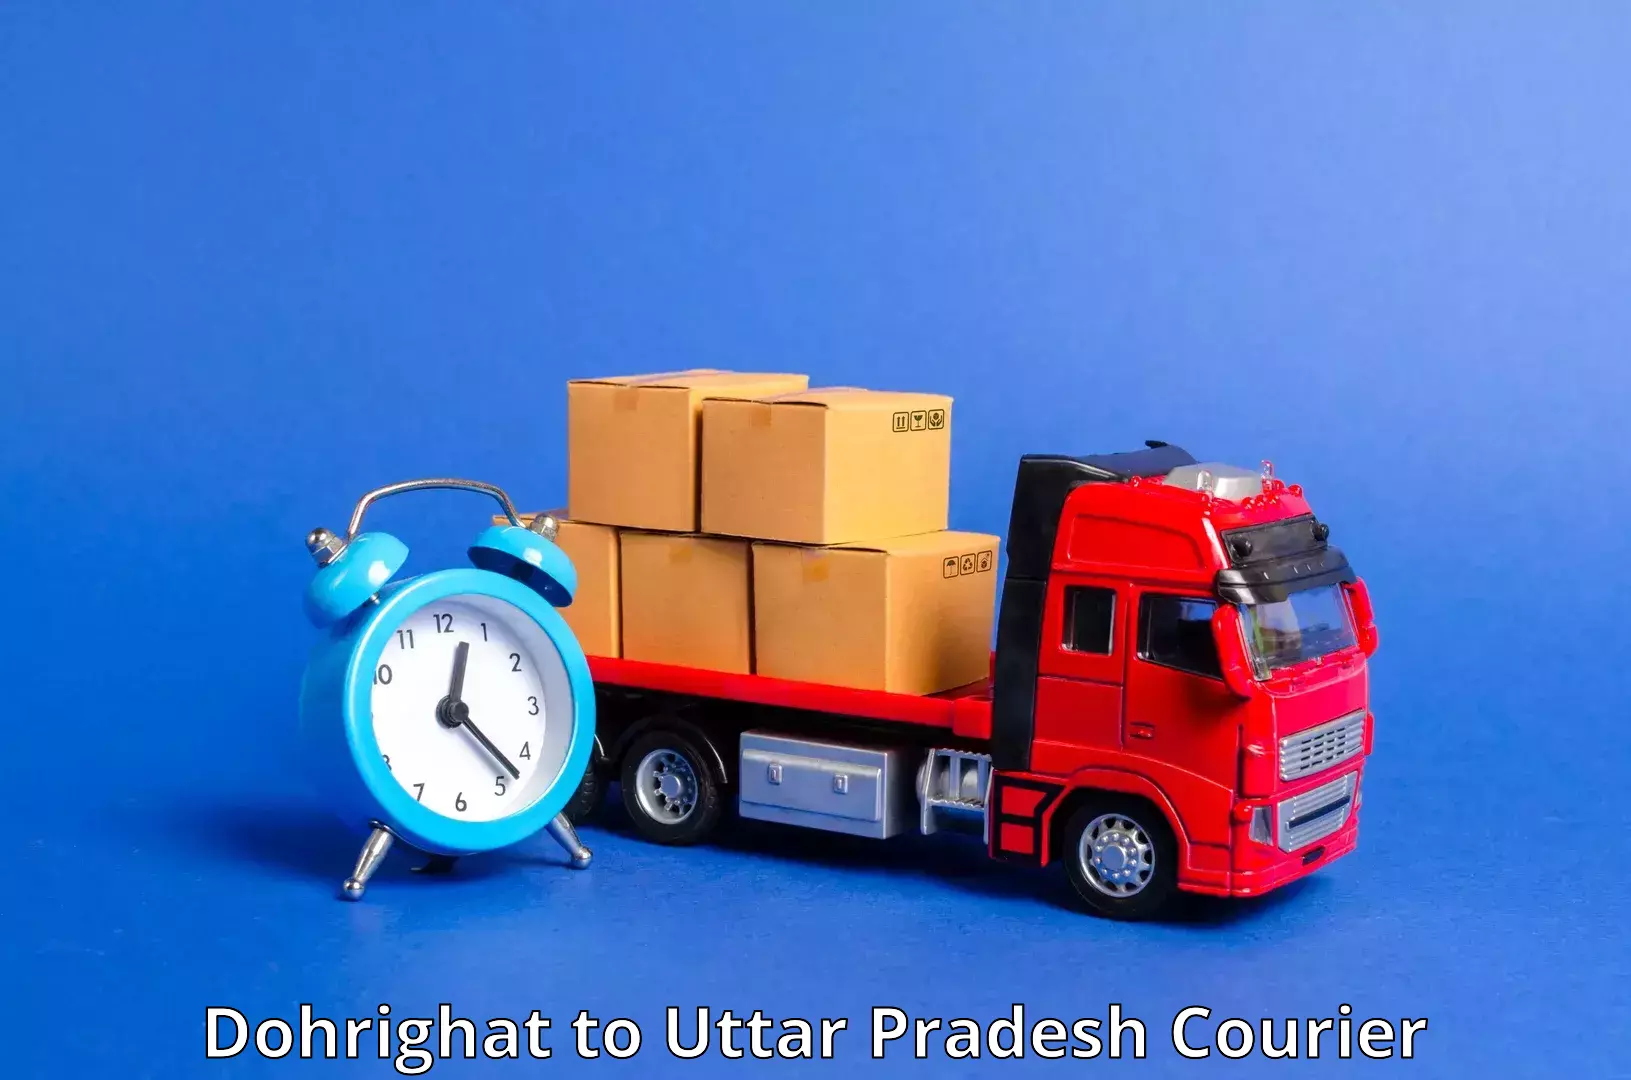 Courier service partnerships Dohrighat to Pilibhit